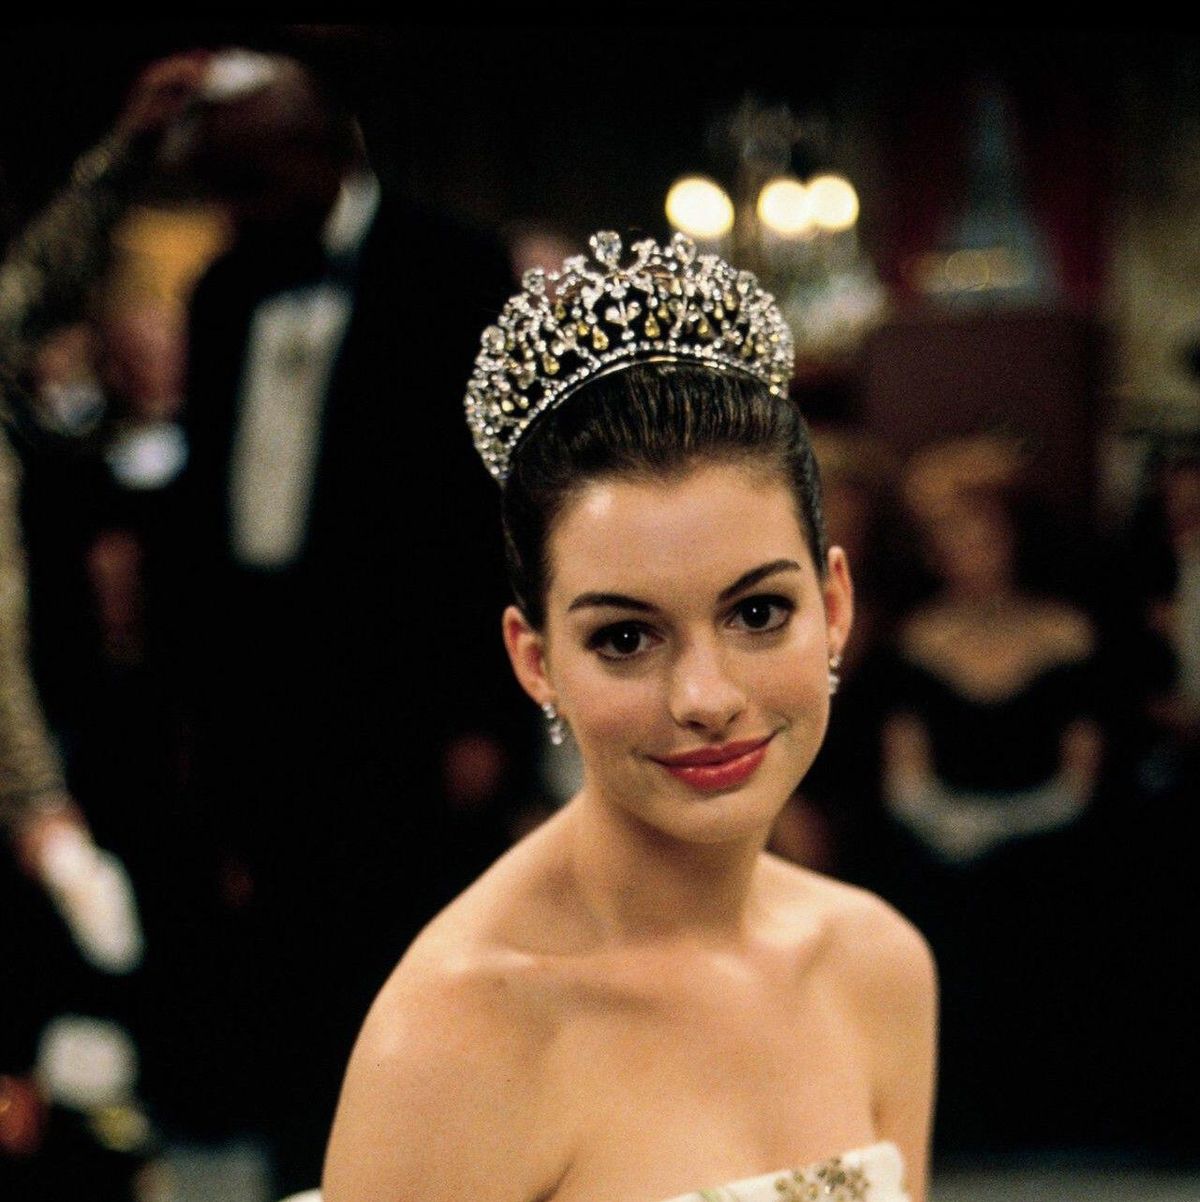 Princess Diaries Anne Hathaway Porn - Princess Diaries 3' Movie Guide to Release Date, Cast News, Spoilers